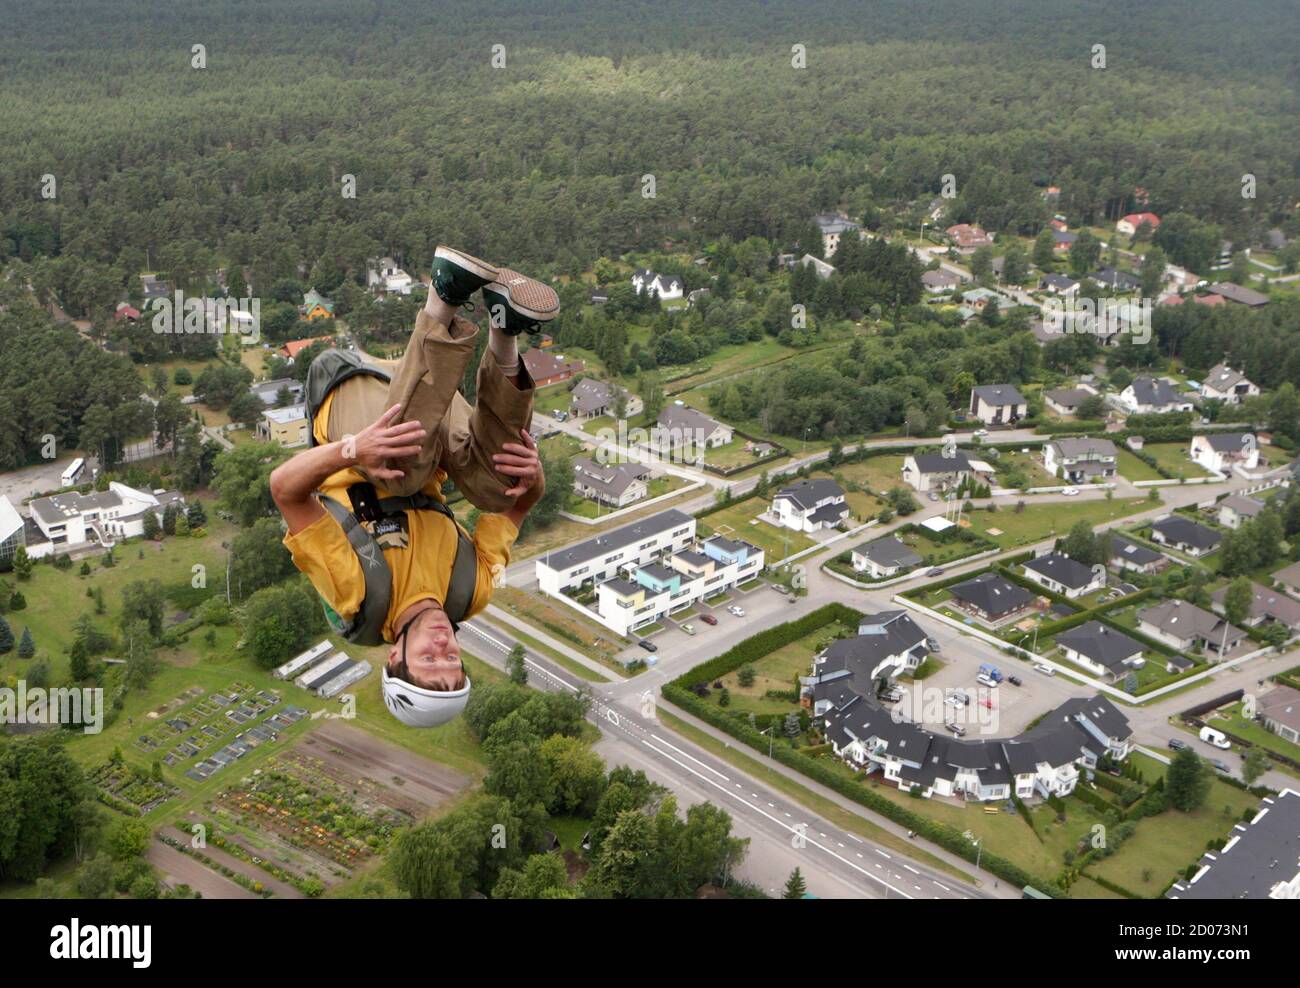 BASE jumper Konstantin Yaemurd of Russia leaps before opening his parachute during Tallinn TV Tower B.A.S.E. Boogie 2013 event July 11, 2013. More than 60 BASE jumpers from fourteen countries are taking part in this annual event. REUTERS/Ints Kalnins (ESTONIA - Tags: SPORT SOCIETY) Stock Photo